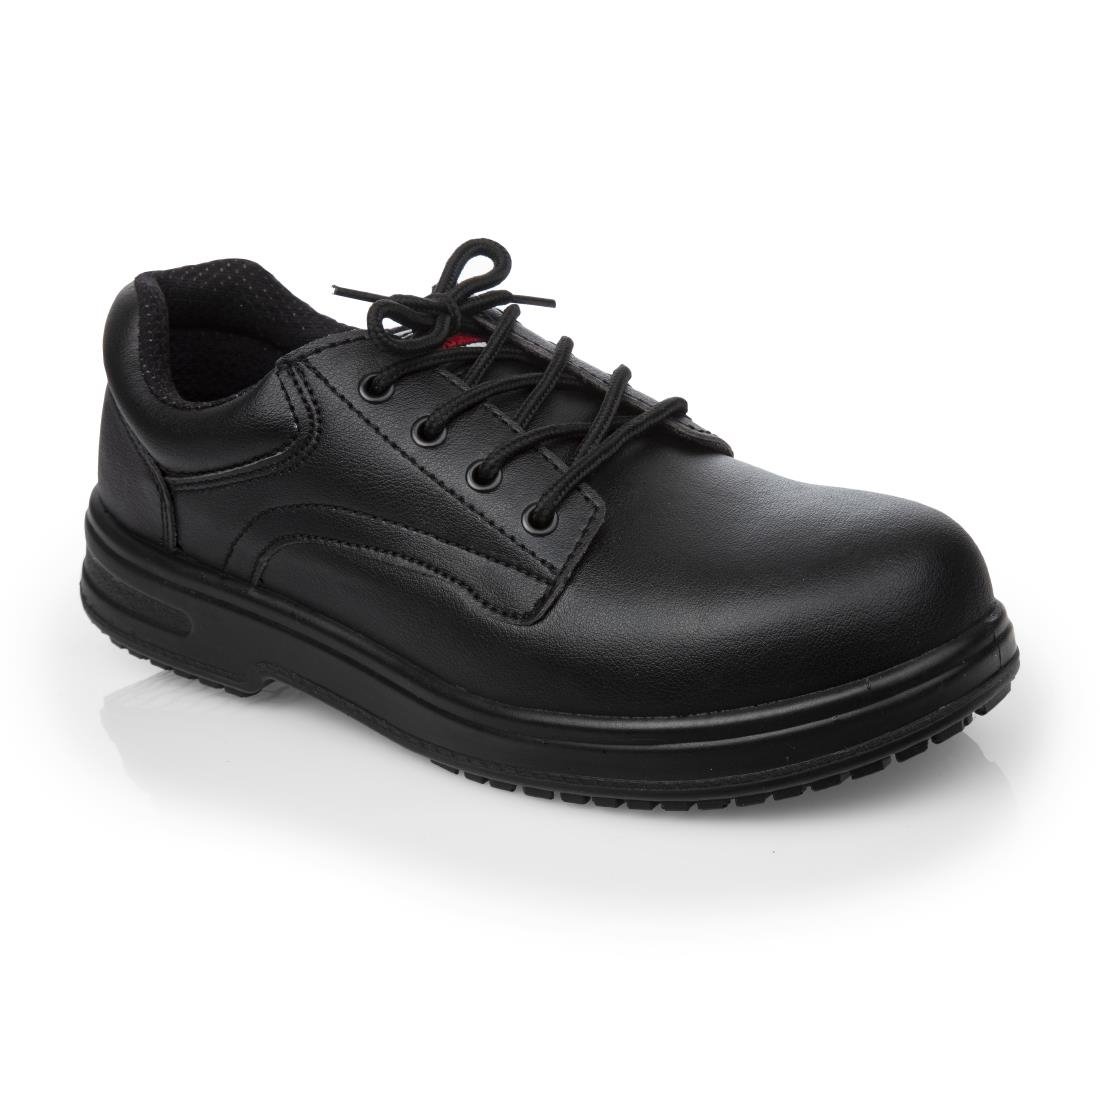 BB497-43 Slipbuster Basic Toe Cap Safety Shoes Black 43 JD Catering Equipment Solutions Ltd